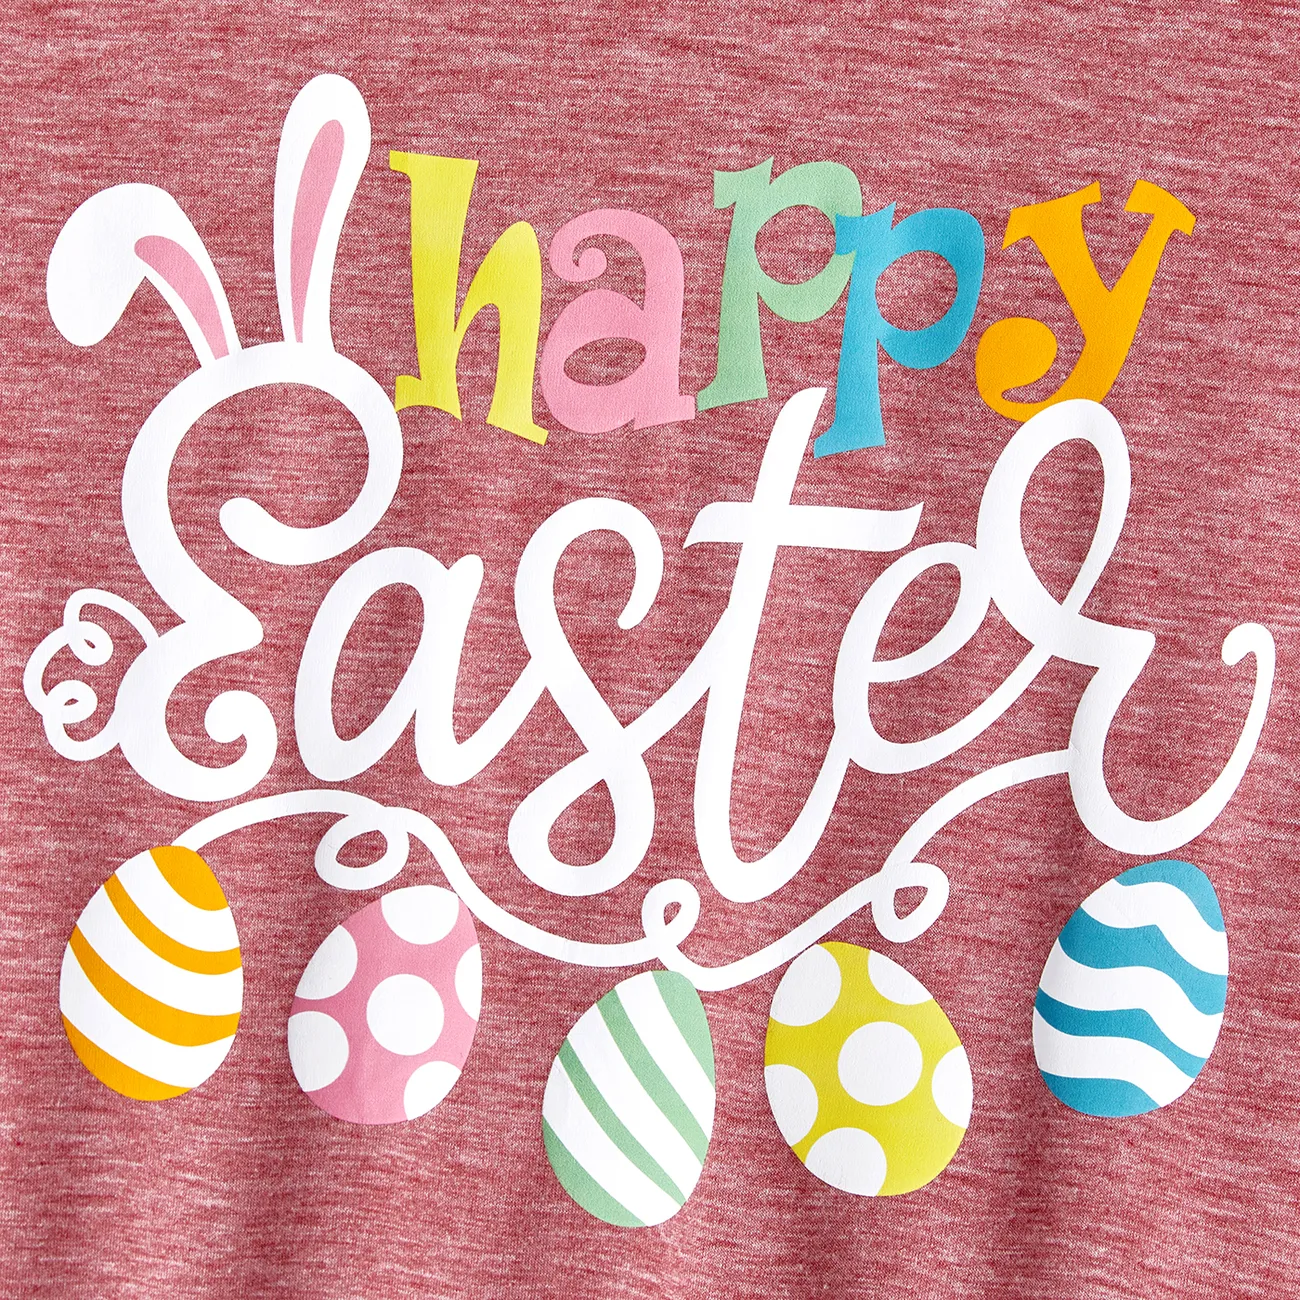 Easter Family Matching Short-sleeve Graphic Tee ColorBlock big image 1